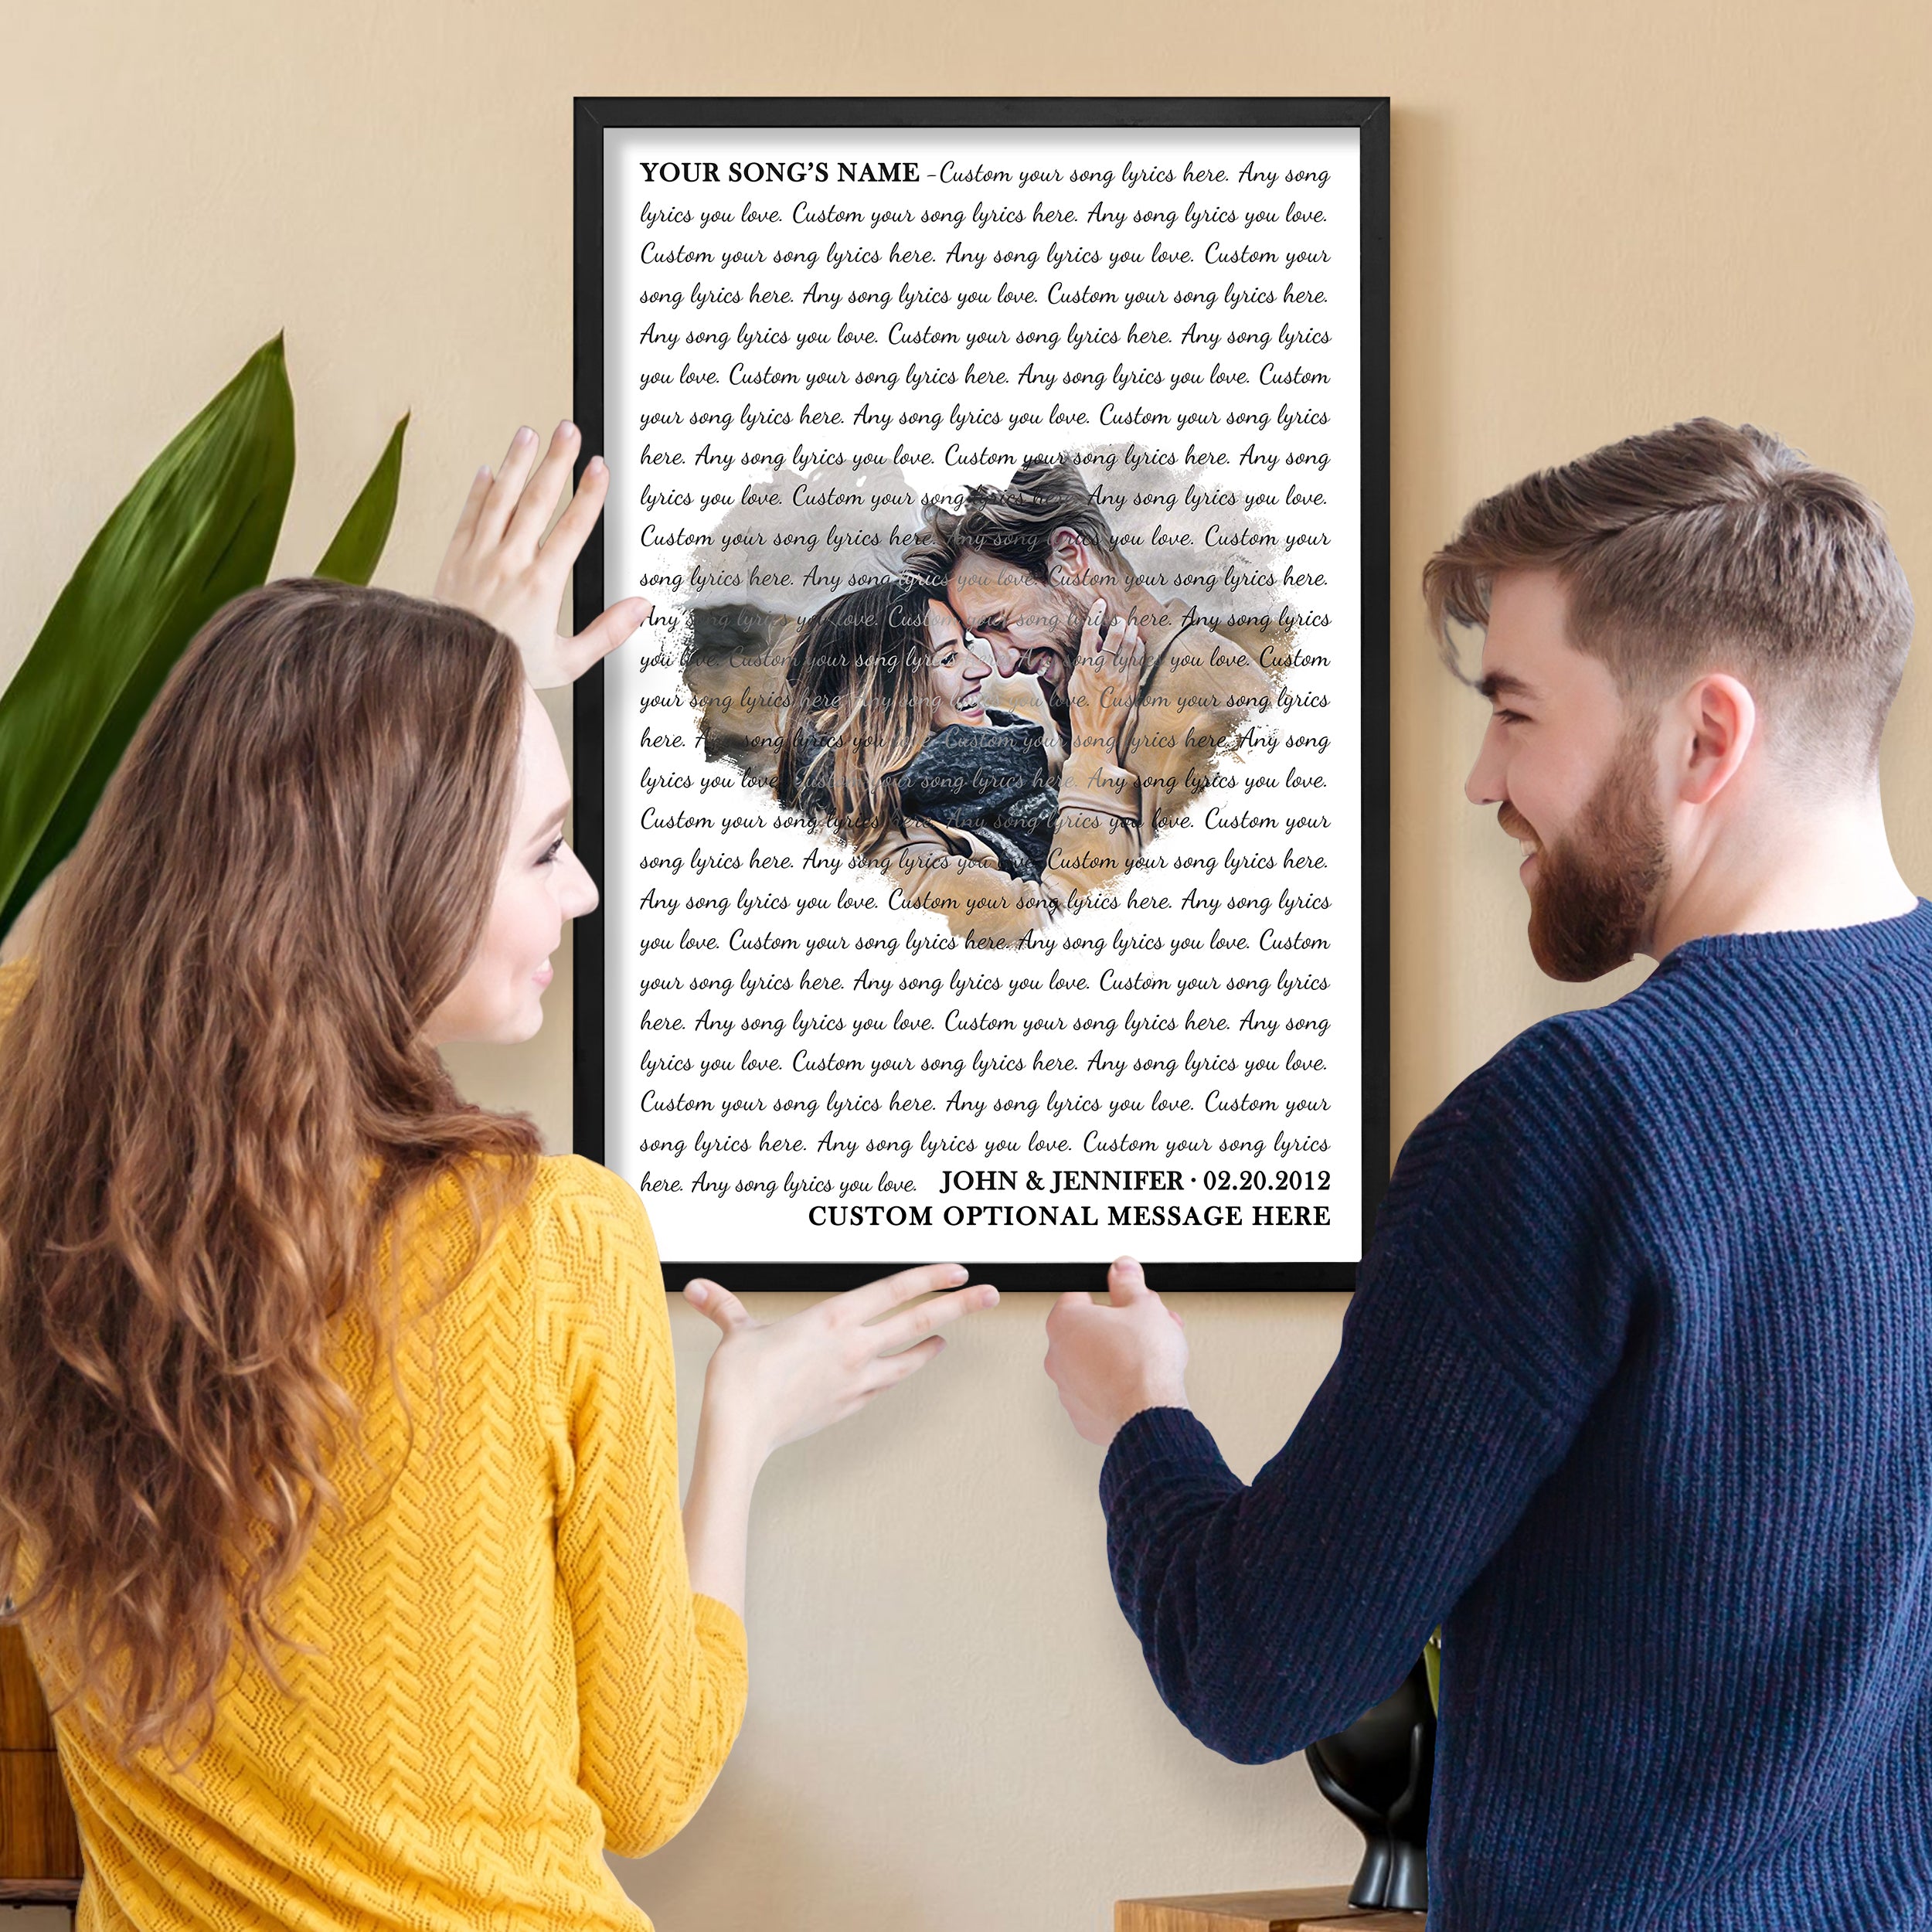 Customized Song Lyrics Poster Photo Couples Gifts for Boyfriend from Girlfriend - Perfect Song Chords Couple One Year Anniversary - Personalized Music Canvas Framed Couple Gifts for Him